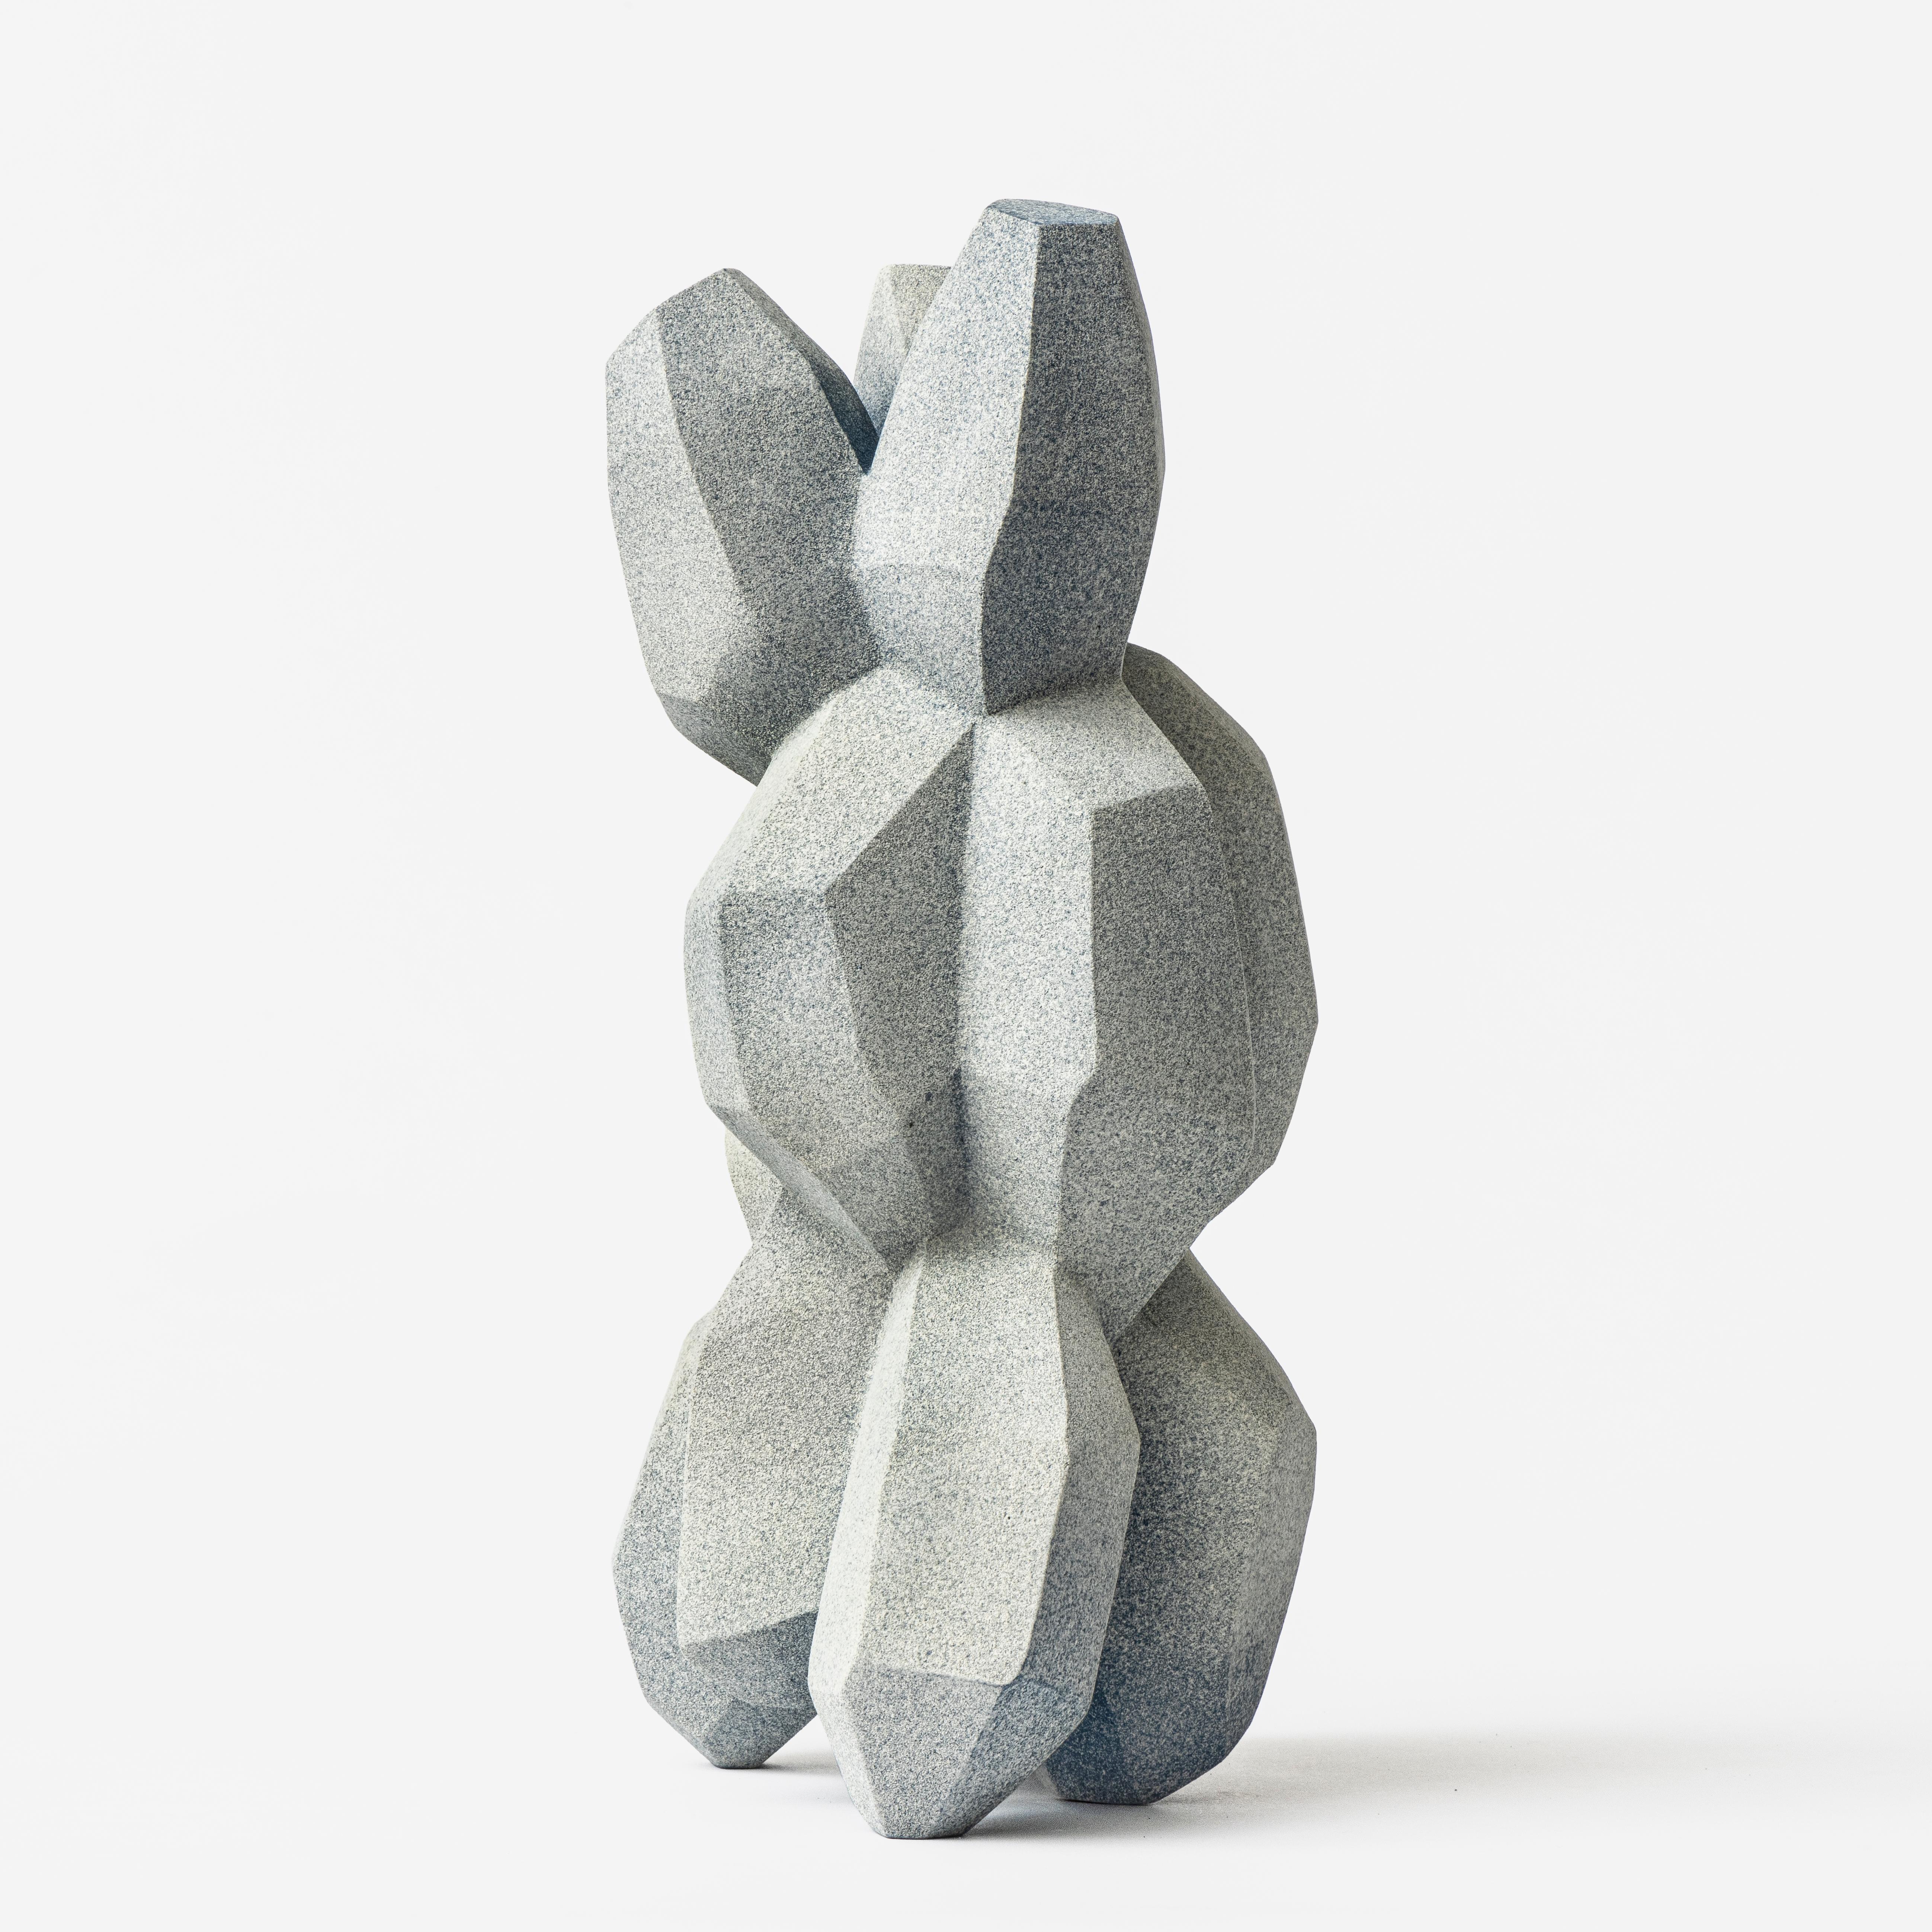 Knotty Shape, 2023, (Ceramic, C. 12.2 in. h x 6.7 in. w x 5.1 in. d, Object No.: 4155)

Turi Heisselberg Pedersen consistently strives to manifest the vessel as a testament to abstract form and as a standalone sculptural object. In her interplay